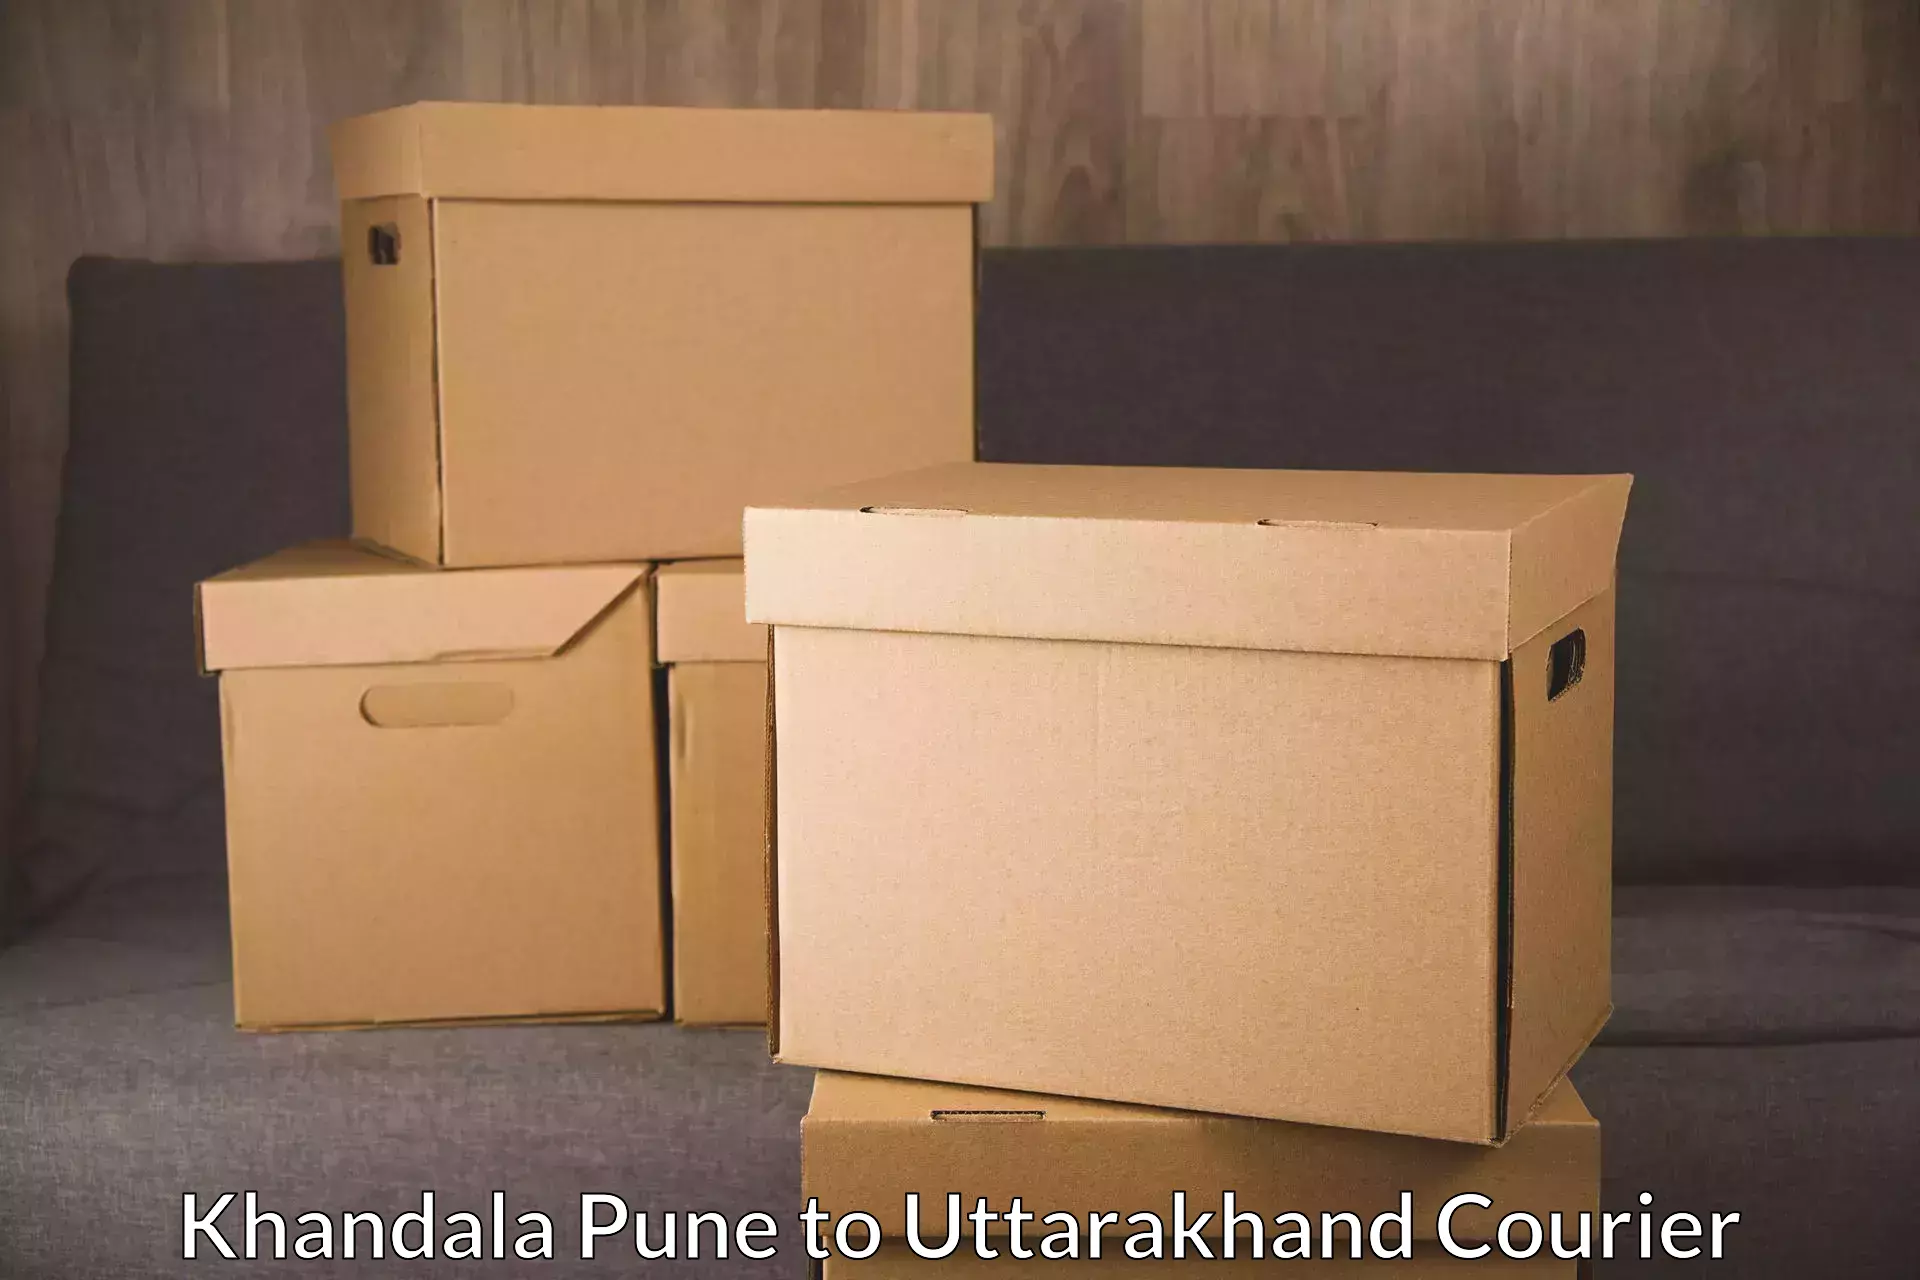 24-hour courier services Khandala Pune to Tehri